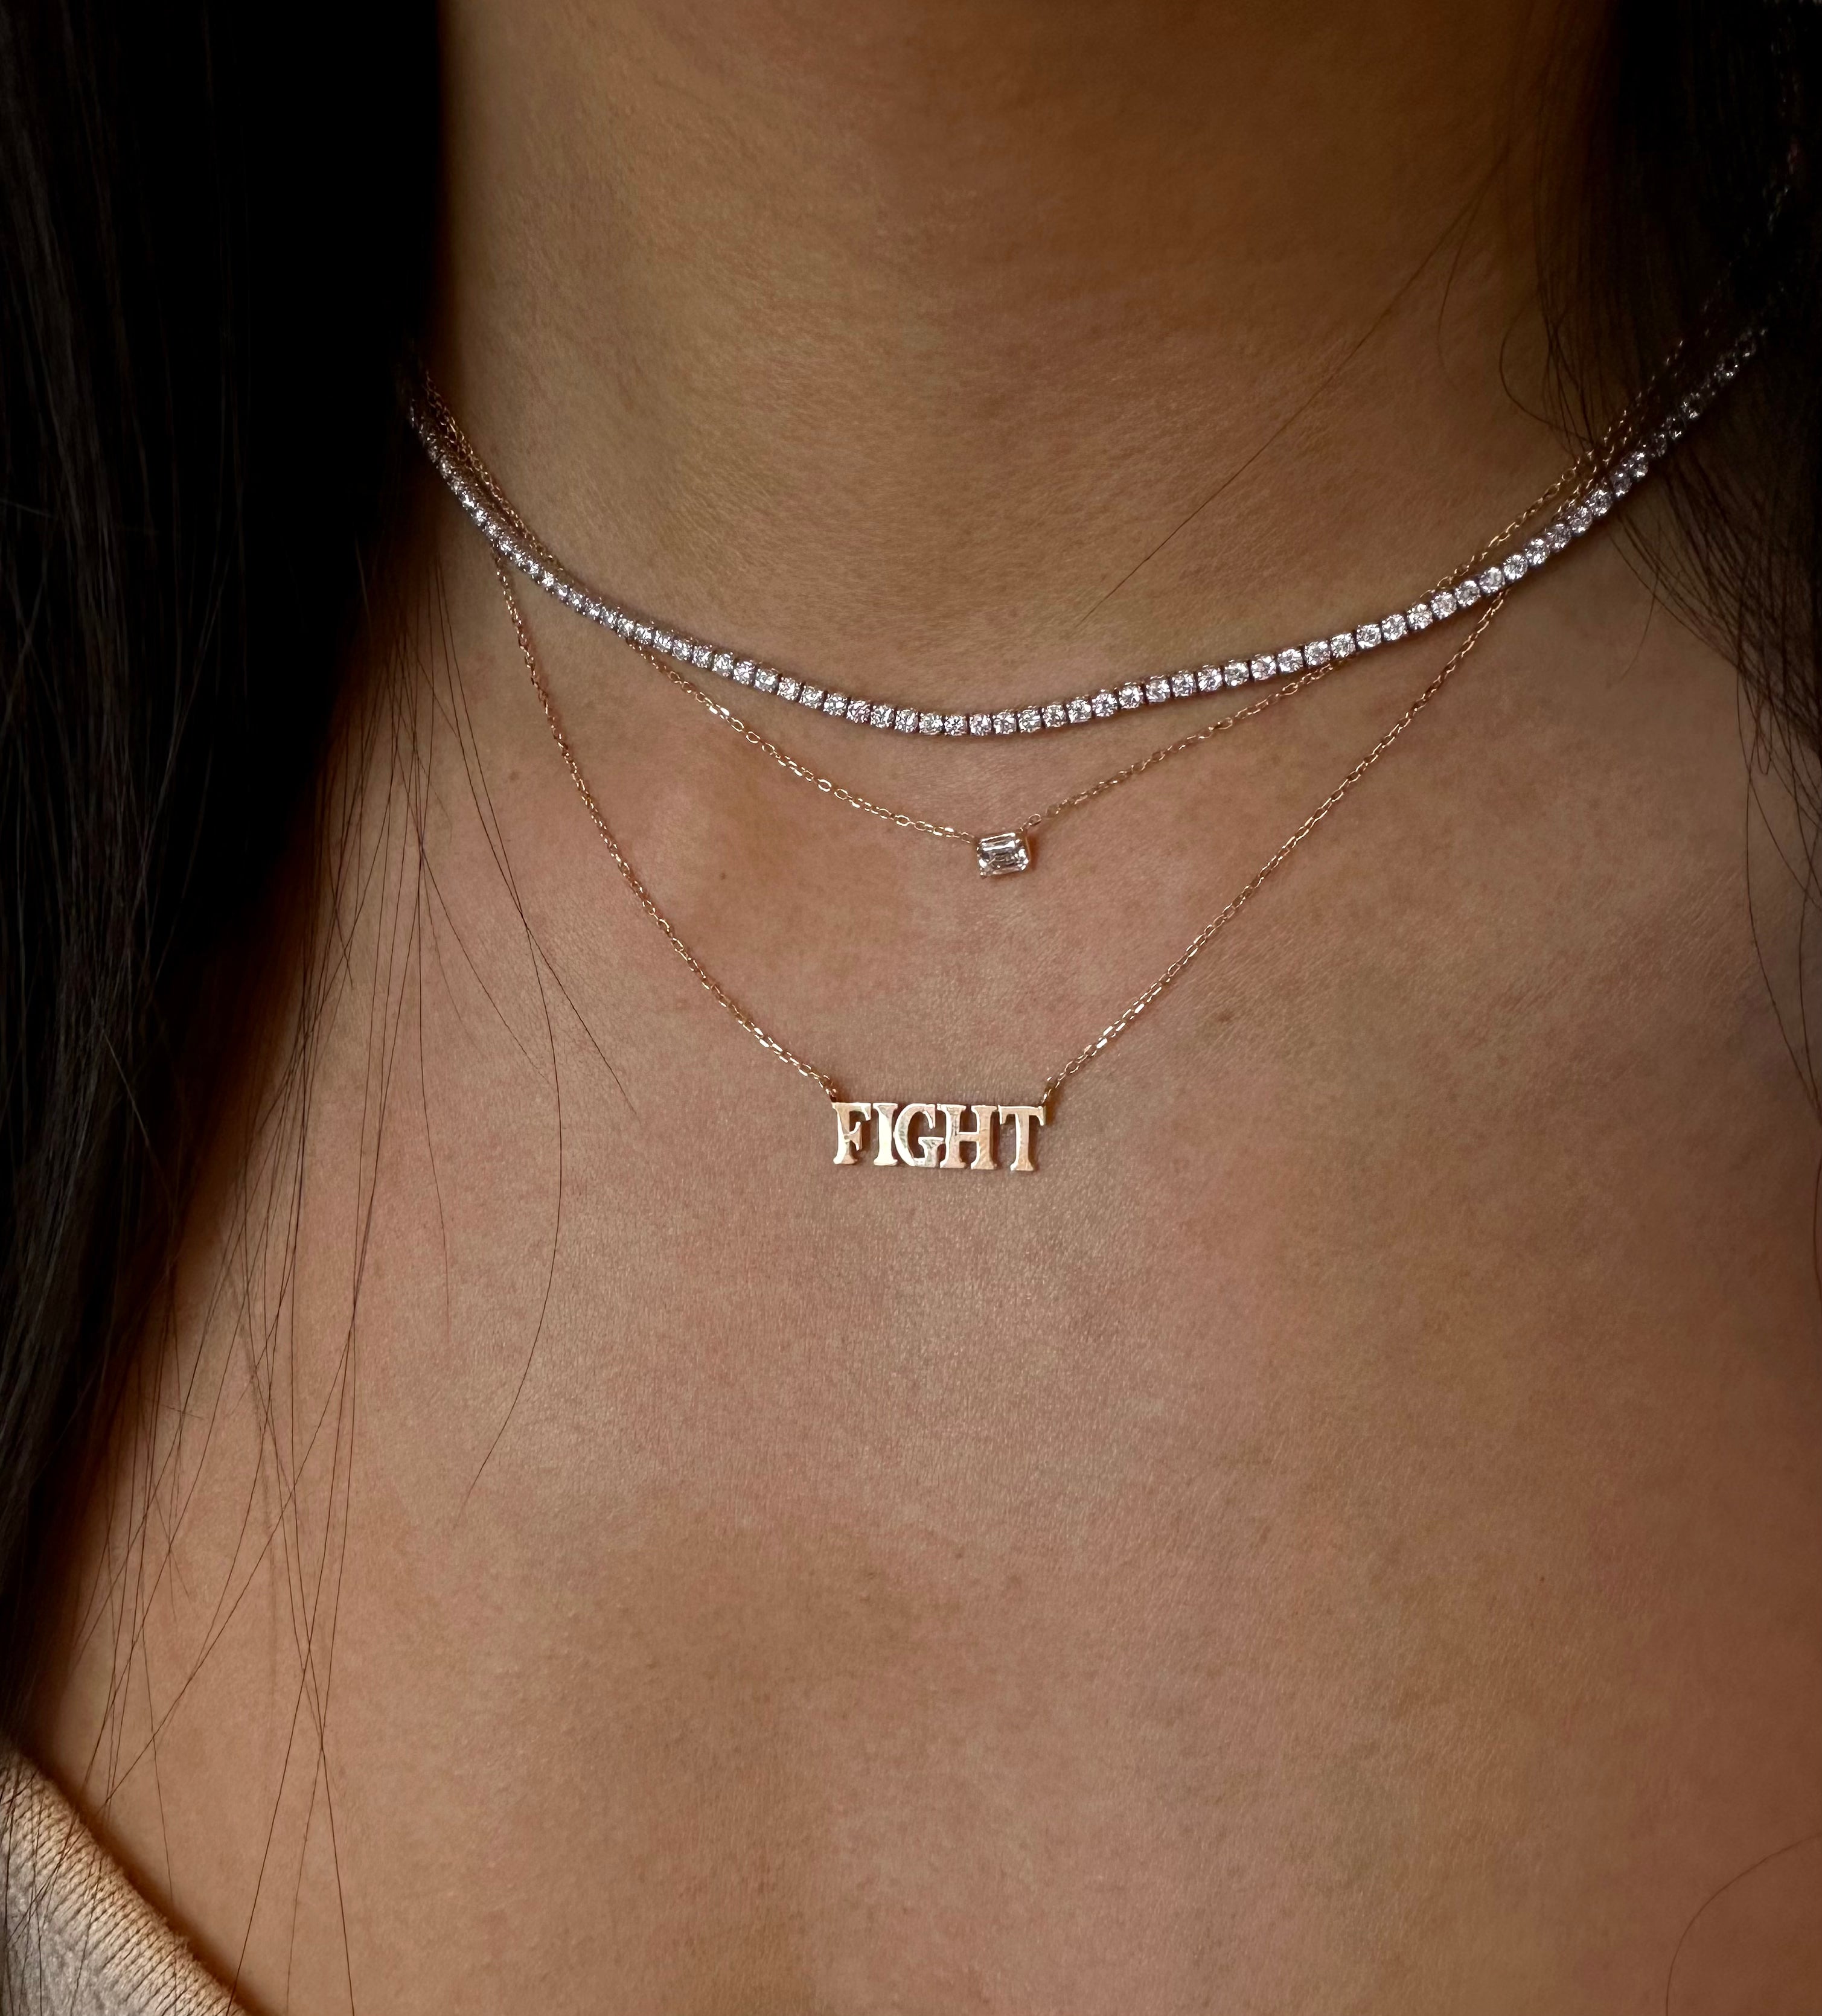 Fight script design on chain. Length: 16mm Width: 5mm  Chain Length: 16-18" available in sterling silver.